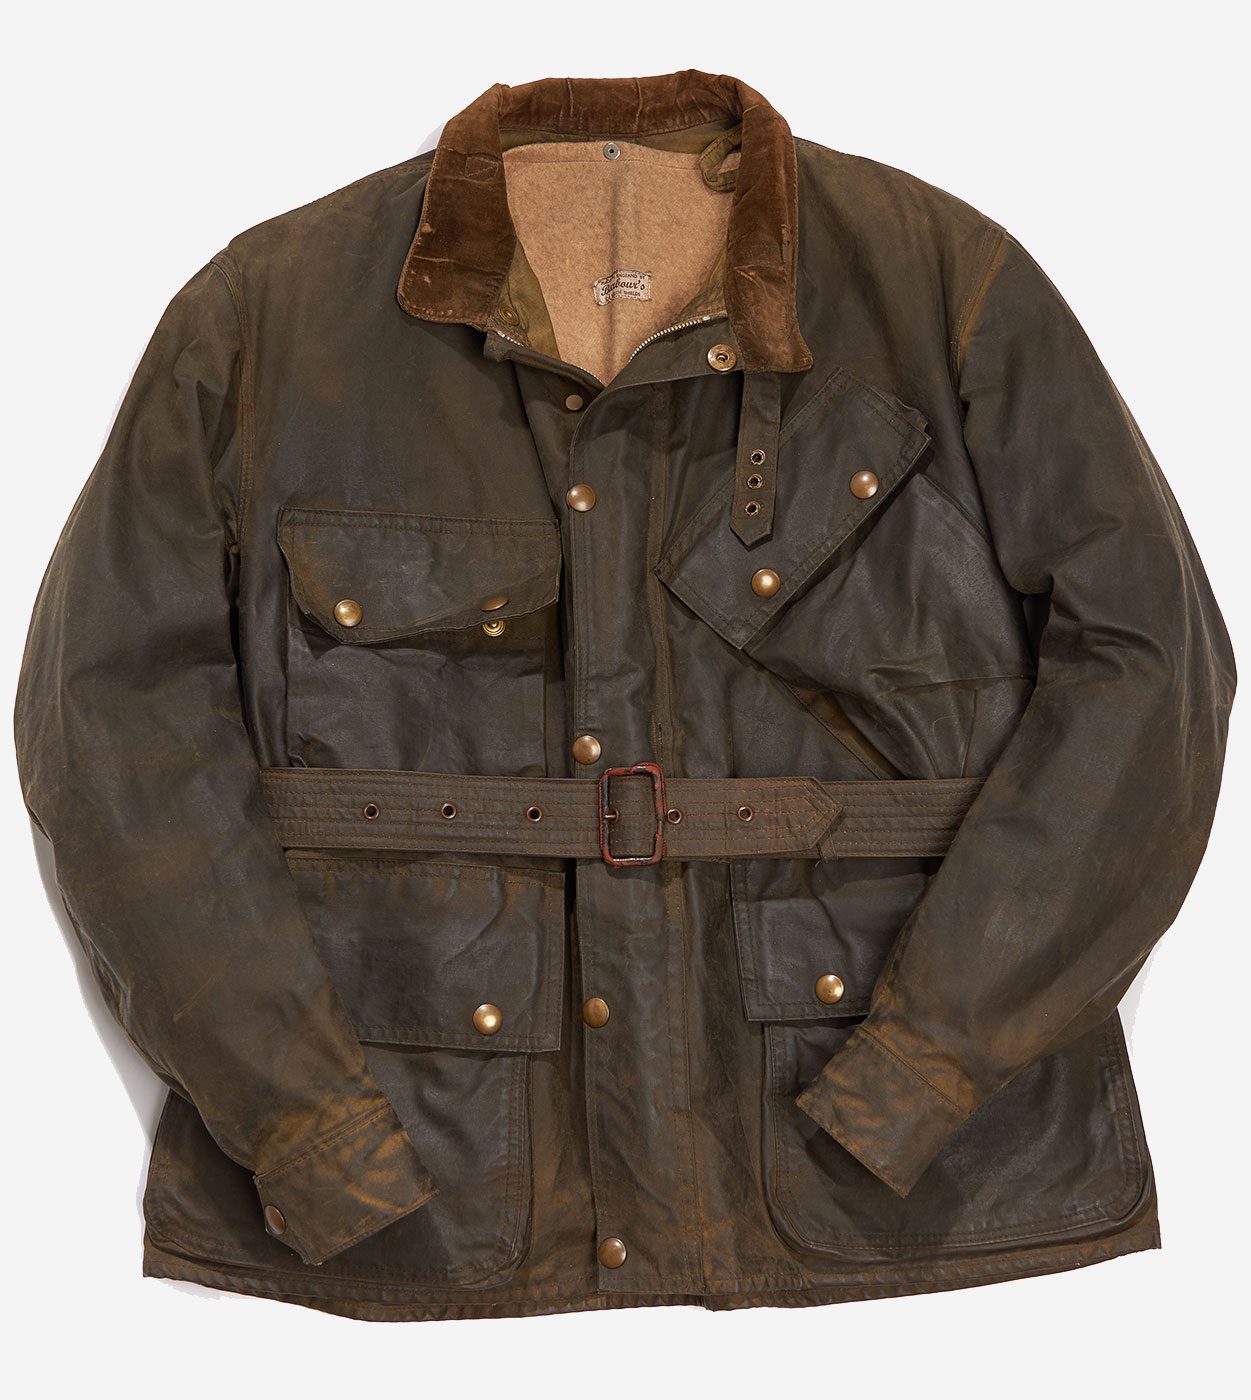 125 years of Barbour: Celebrating a style icon | Gentleman's 